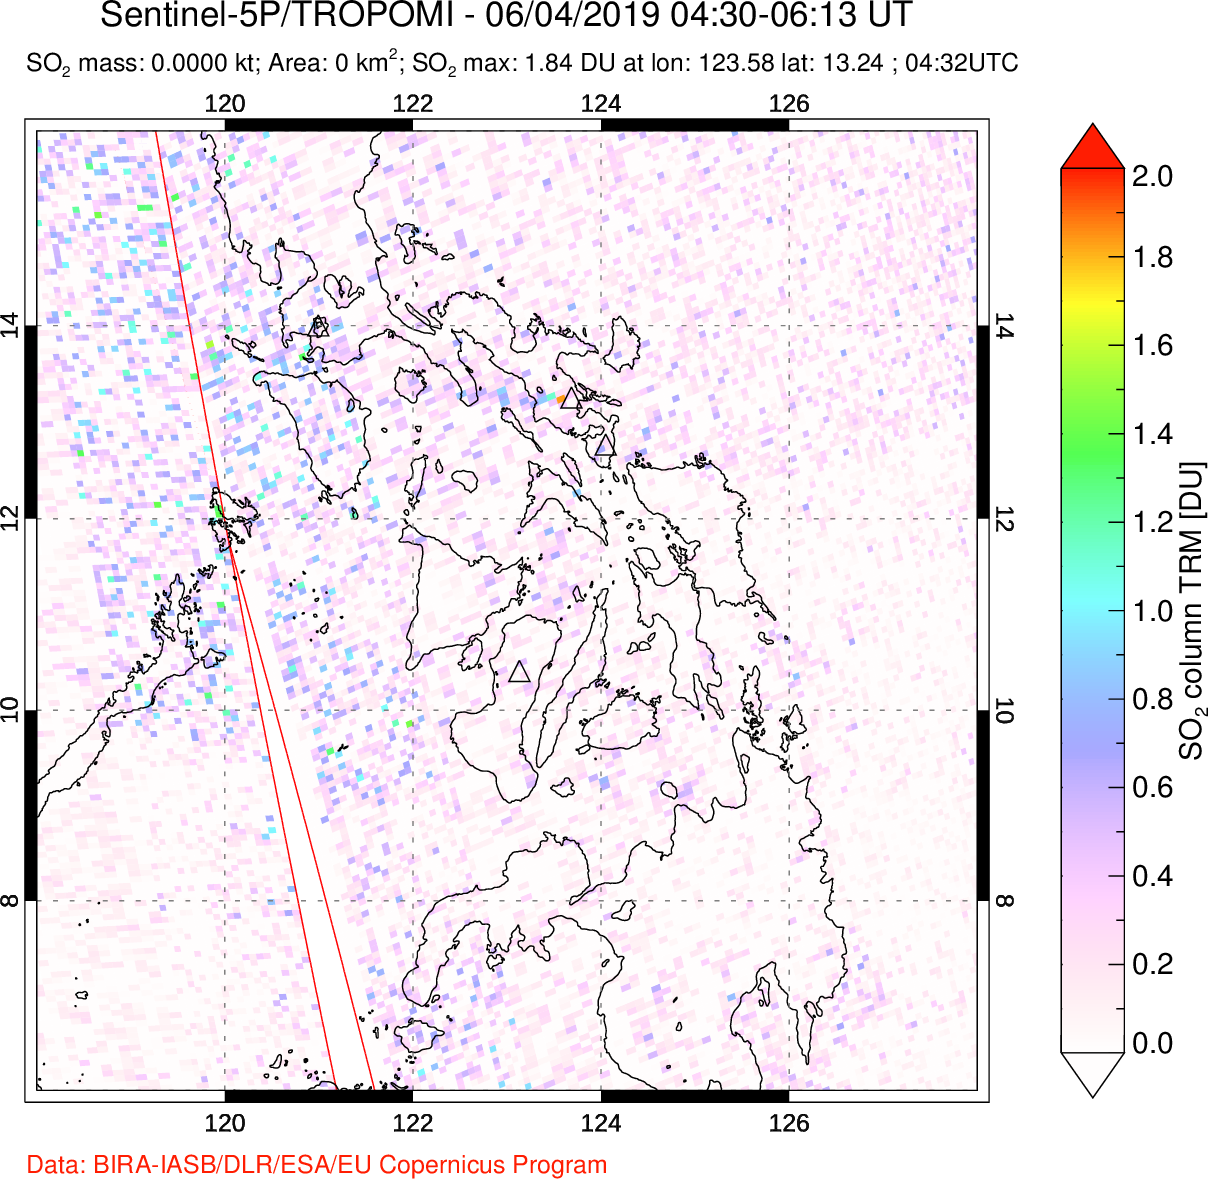 A sulfur dioxide image over Philippines on Jun 04, 2019.